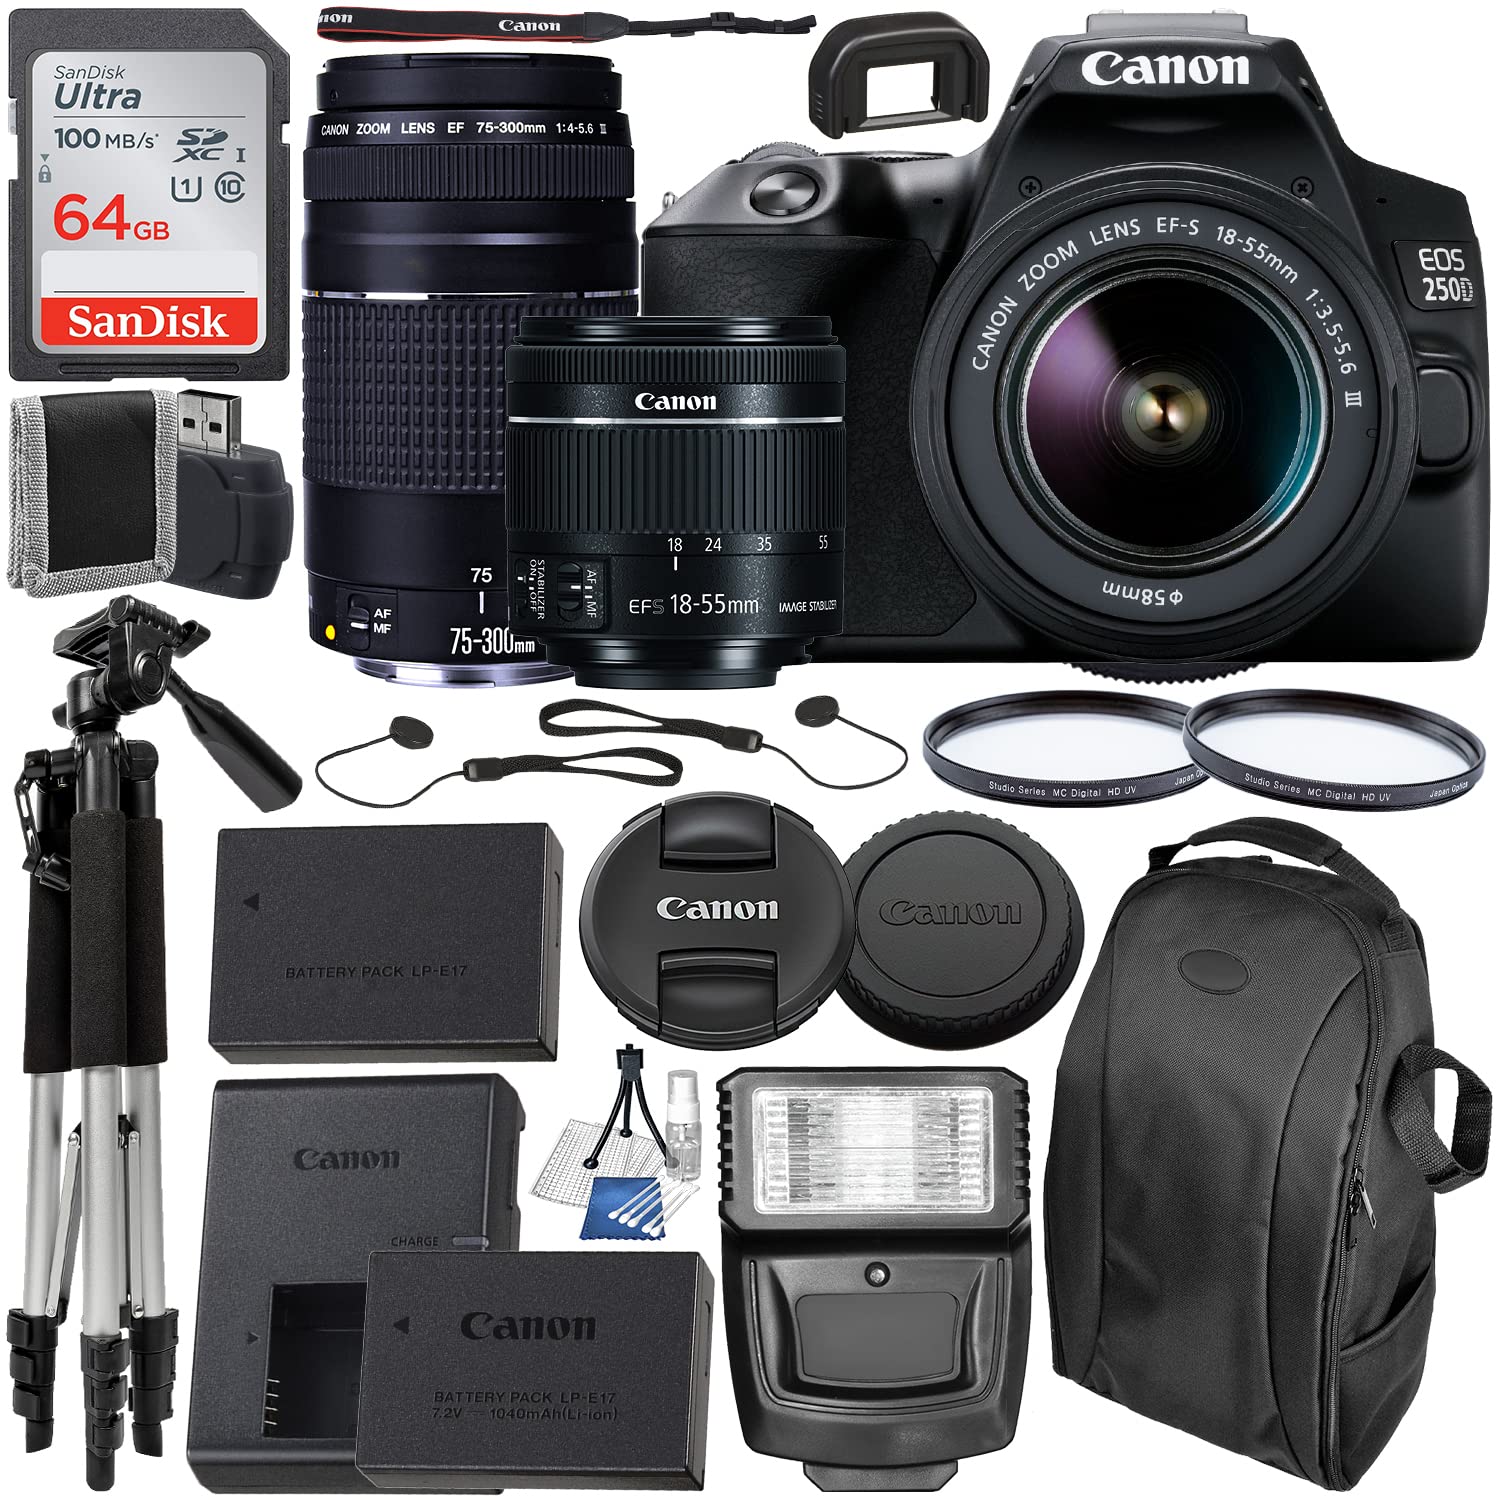 Canon EOS 250D (Rebel SL3) DSLR Camera with 18-55mm & 75-300mm Canon Lenses + 64GB Card, Tripod, Flash, and More (20pc Bundle) Black compact